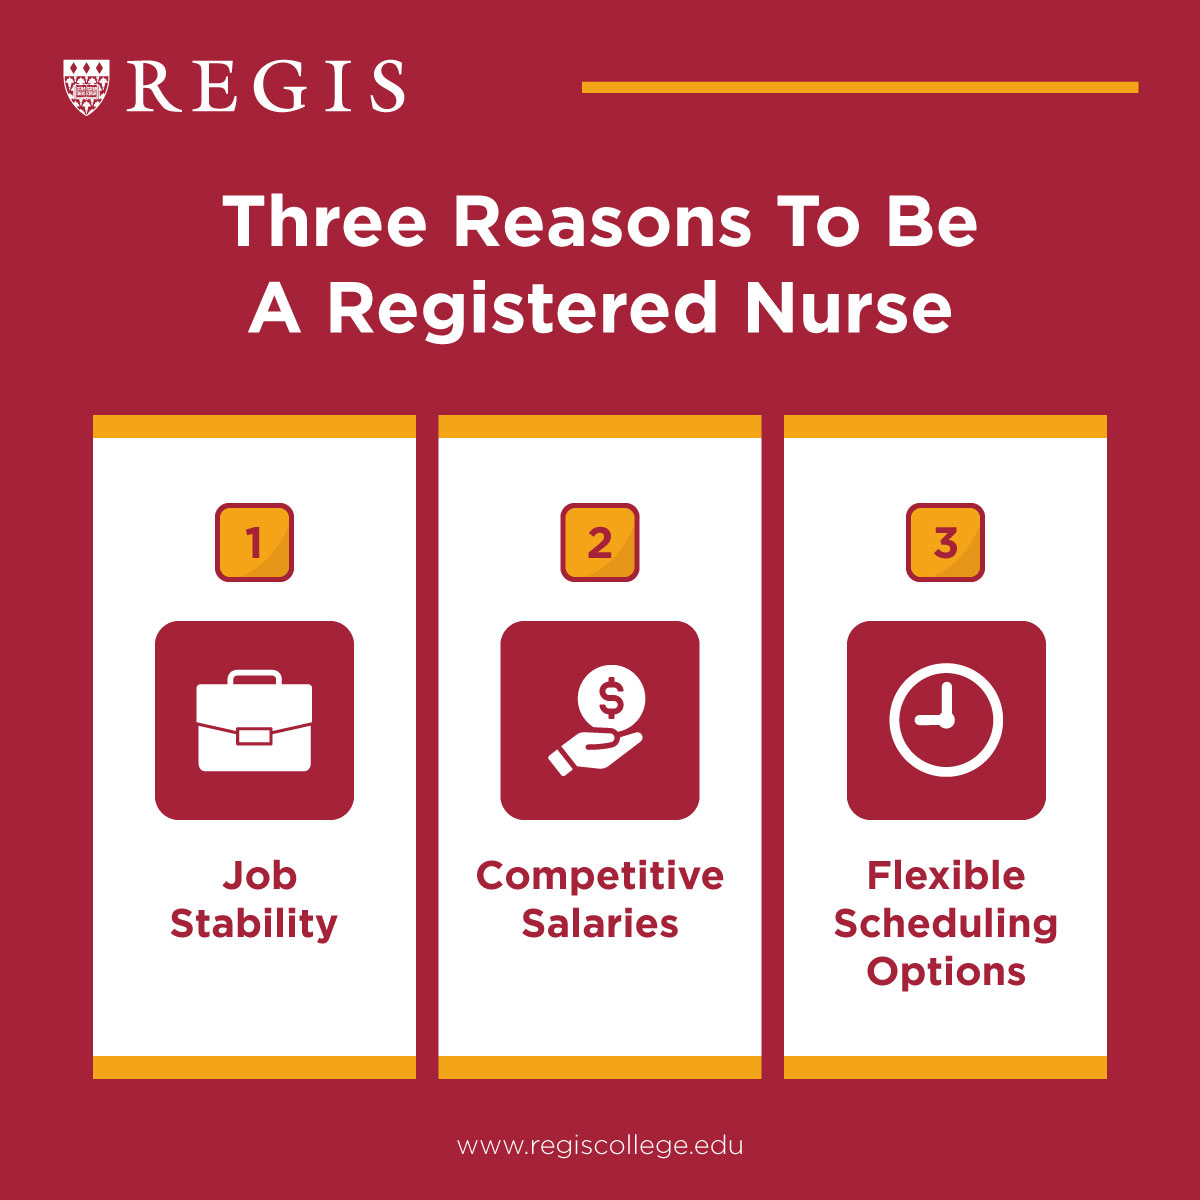 Three reasons to be a registered nurse